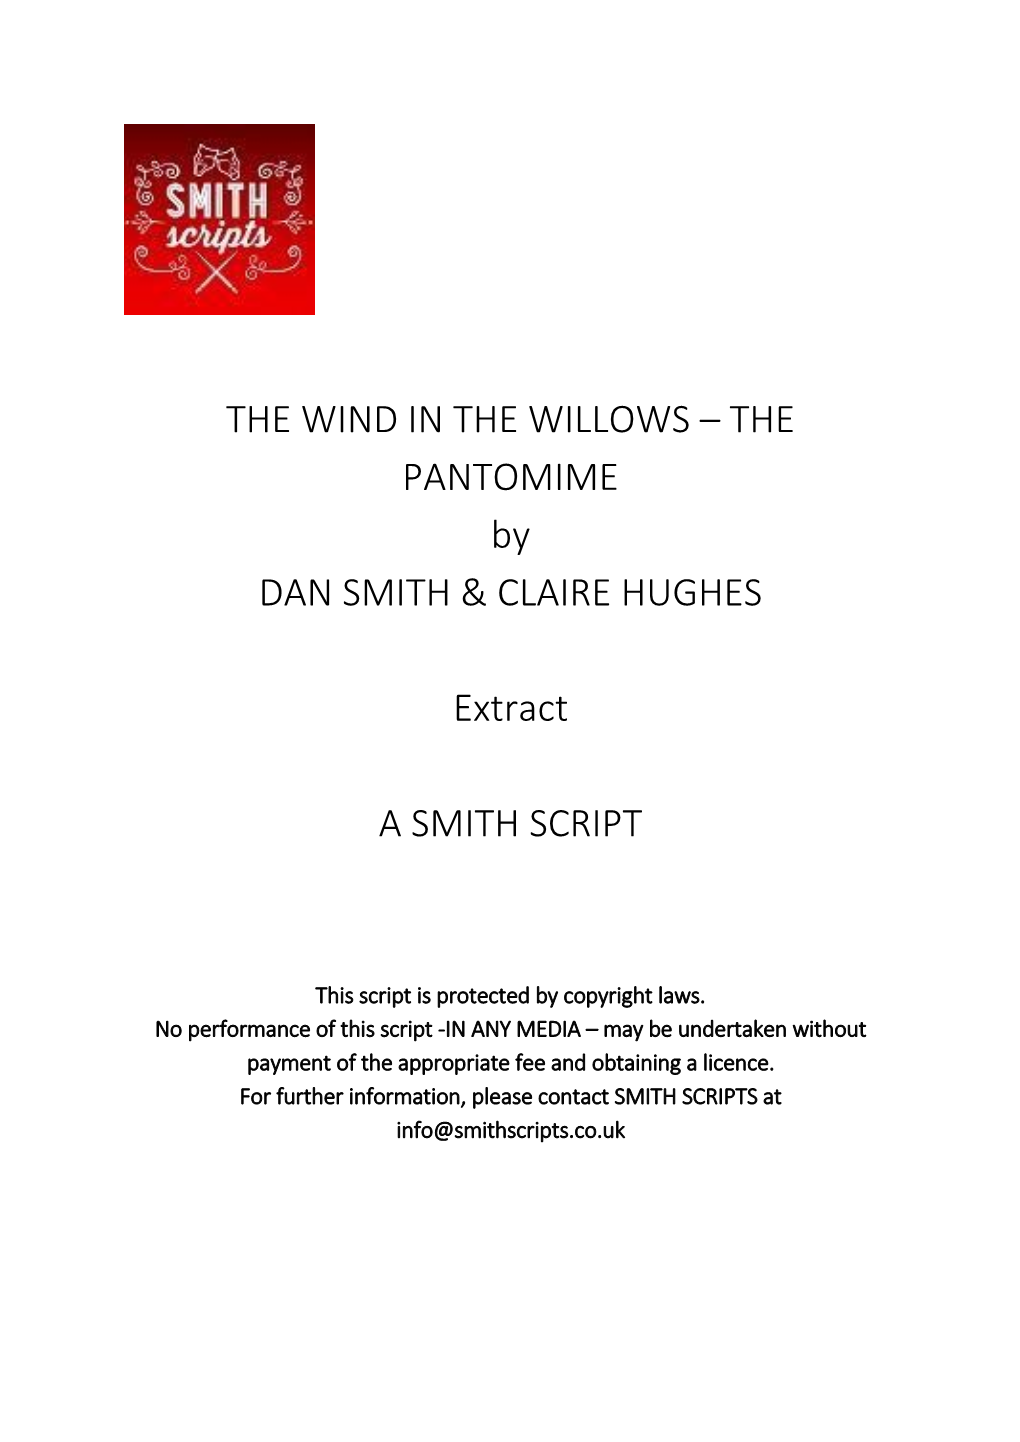 THE WIND in the WILLOWS – the PANTOMIME by DAN SMITH & CLAIRE HUGHES Extract a SMITH SCRIPT